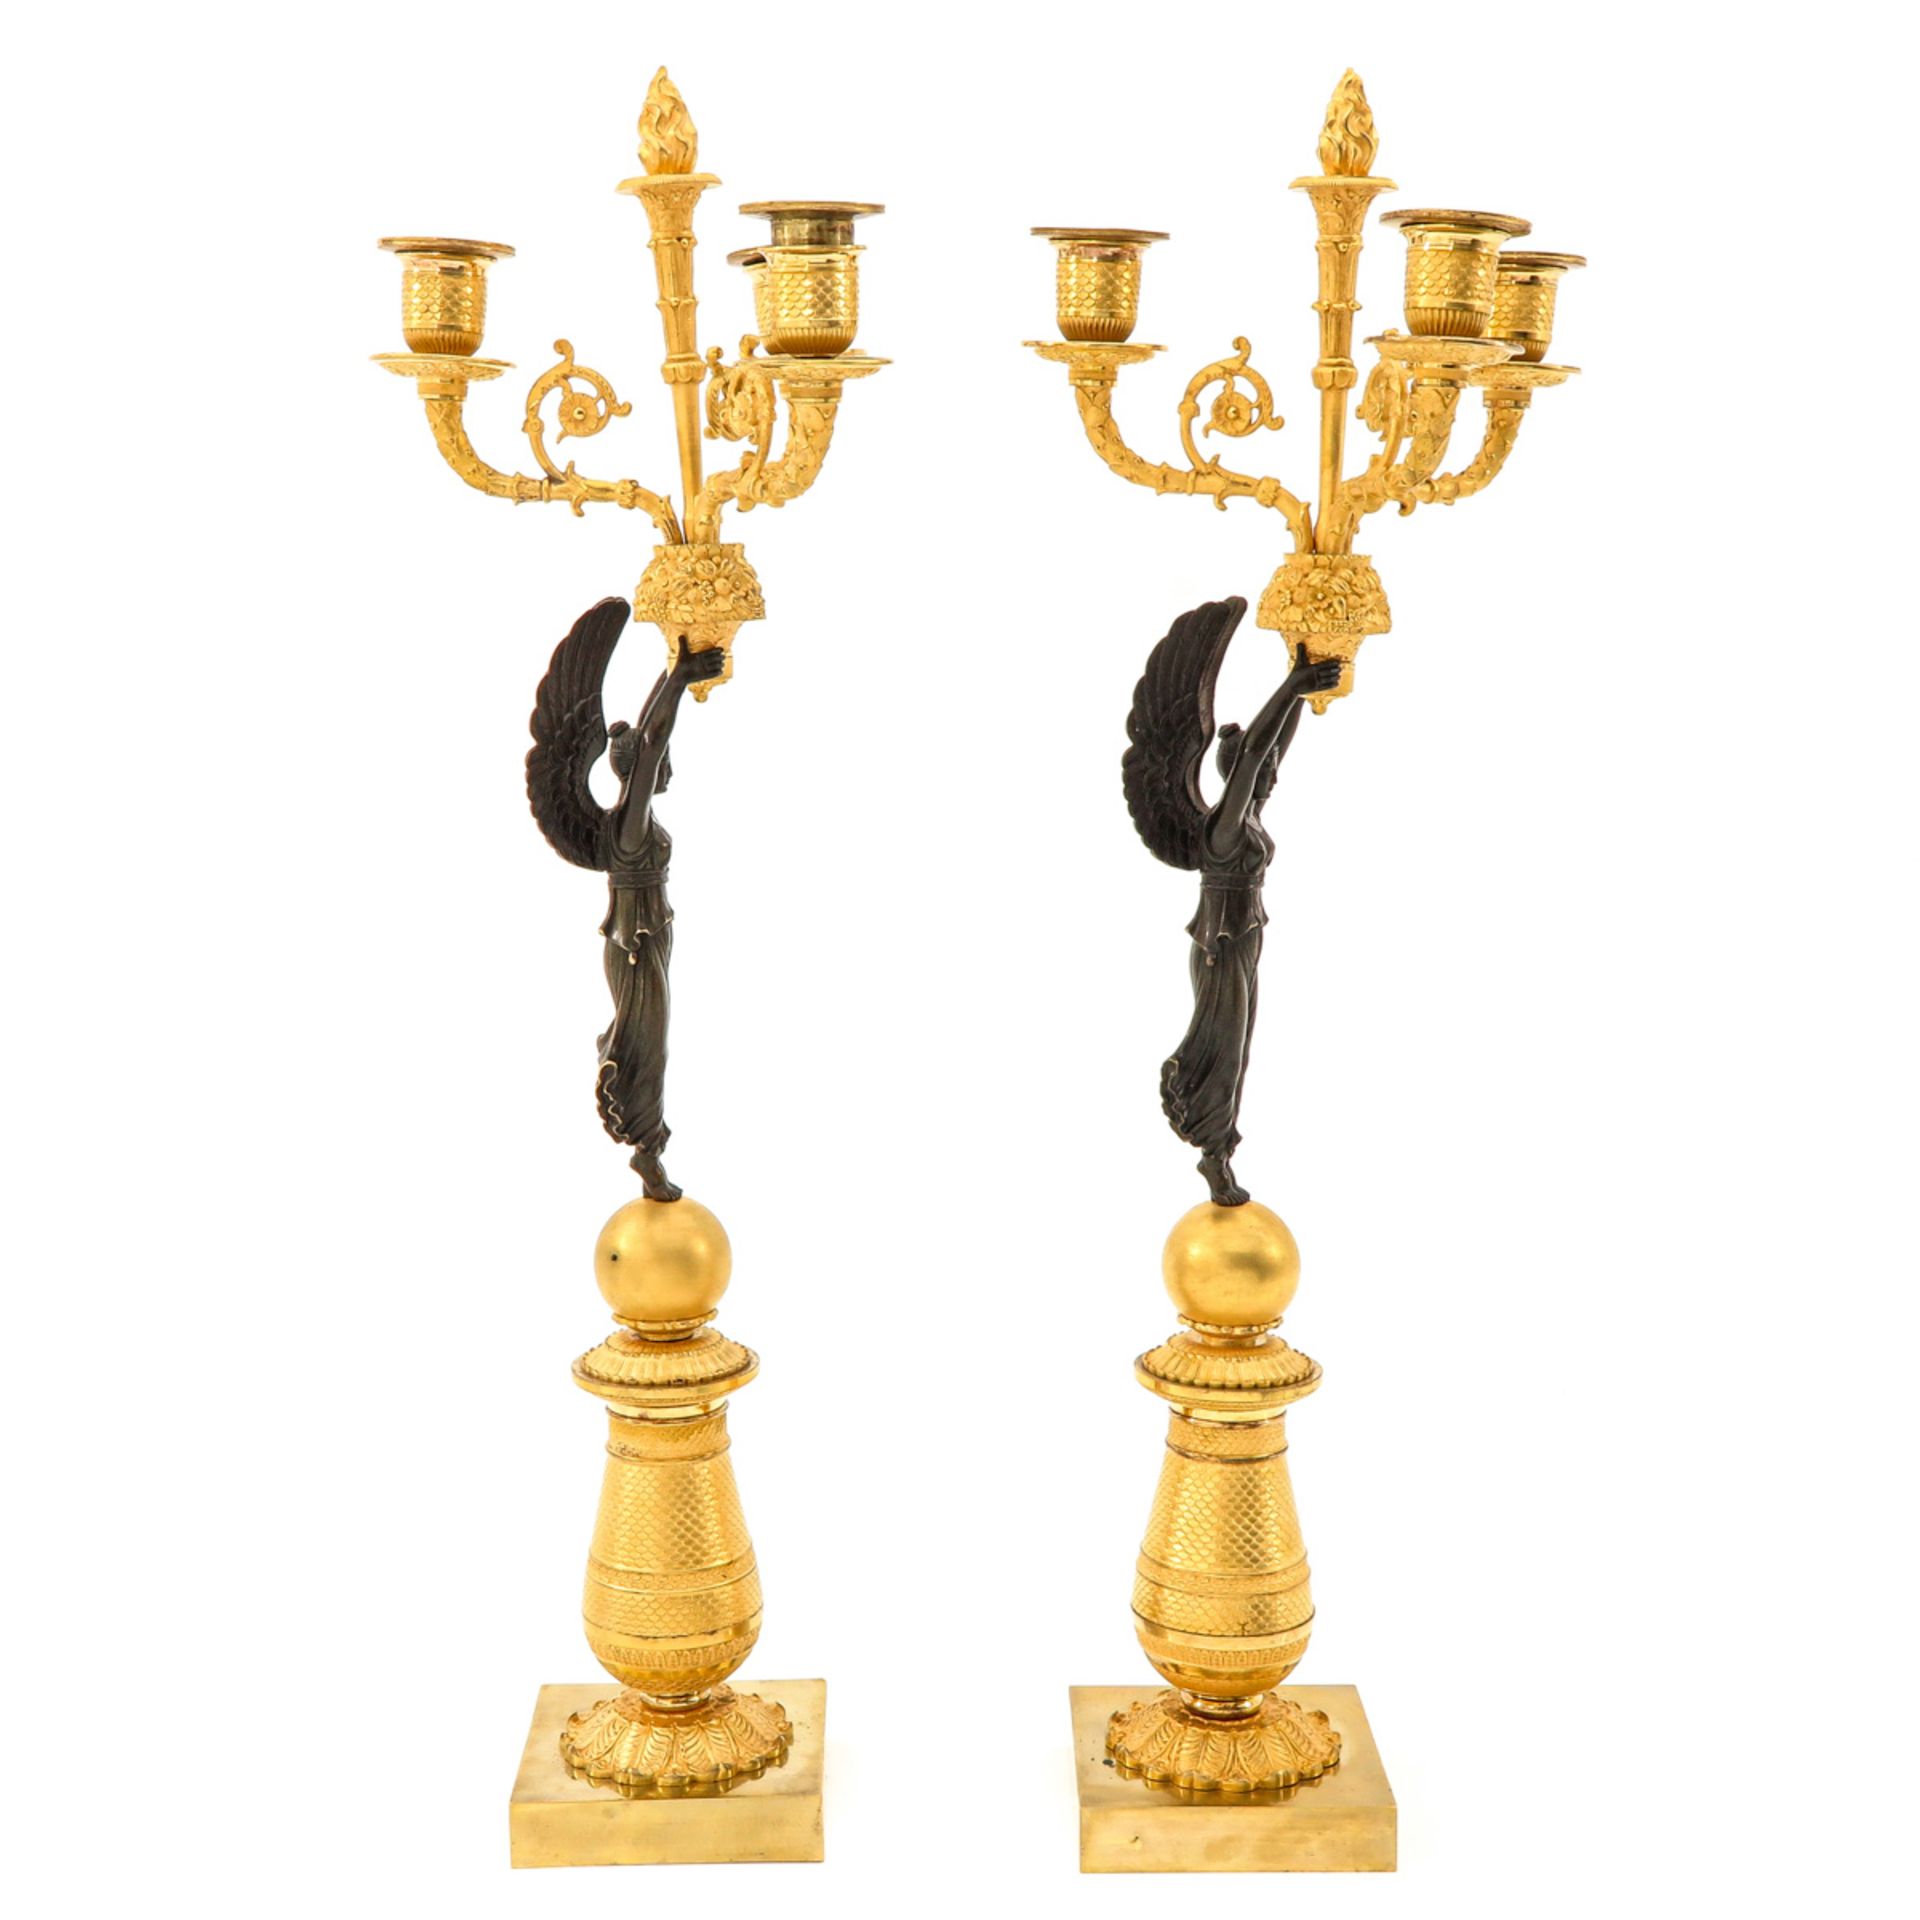 A Pair of Empire Period Candlesticks - Image 4 of 10